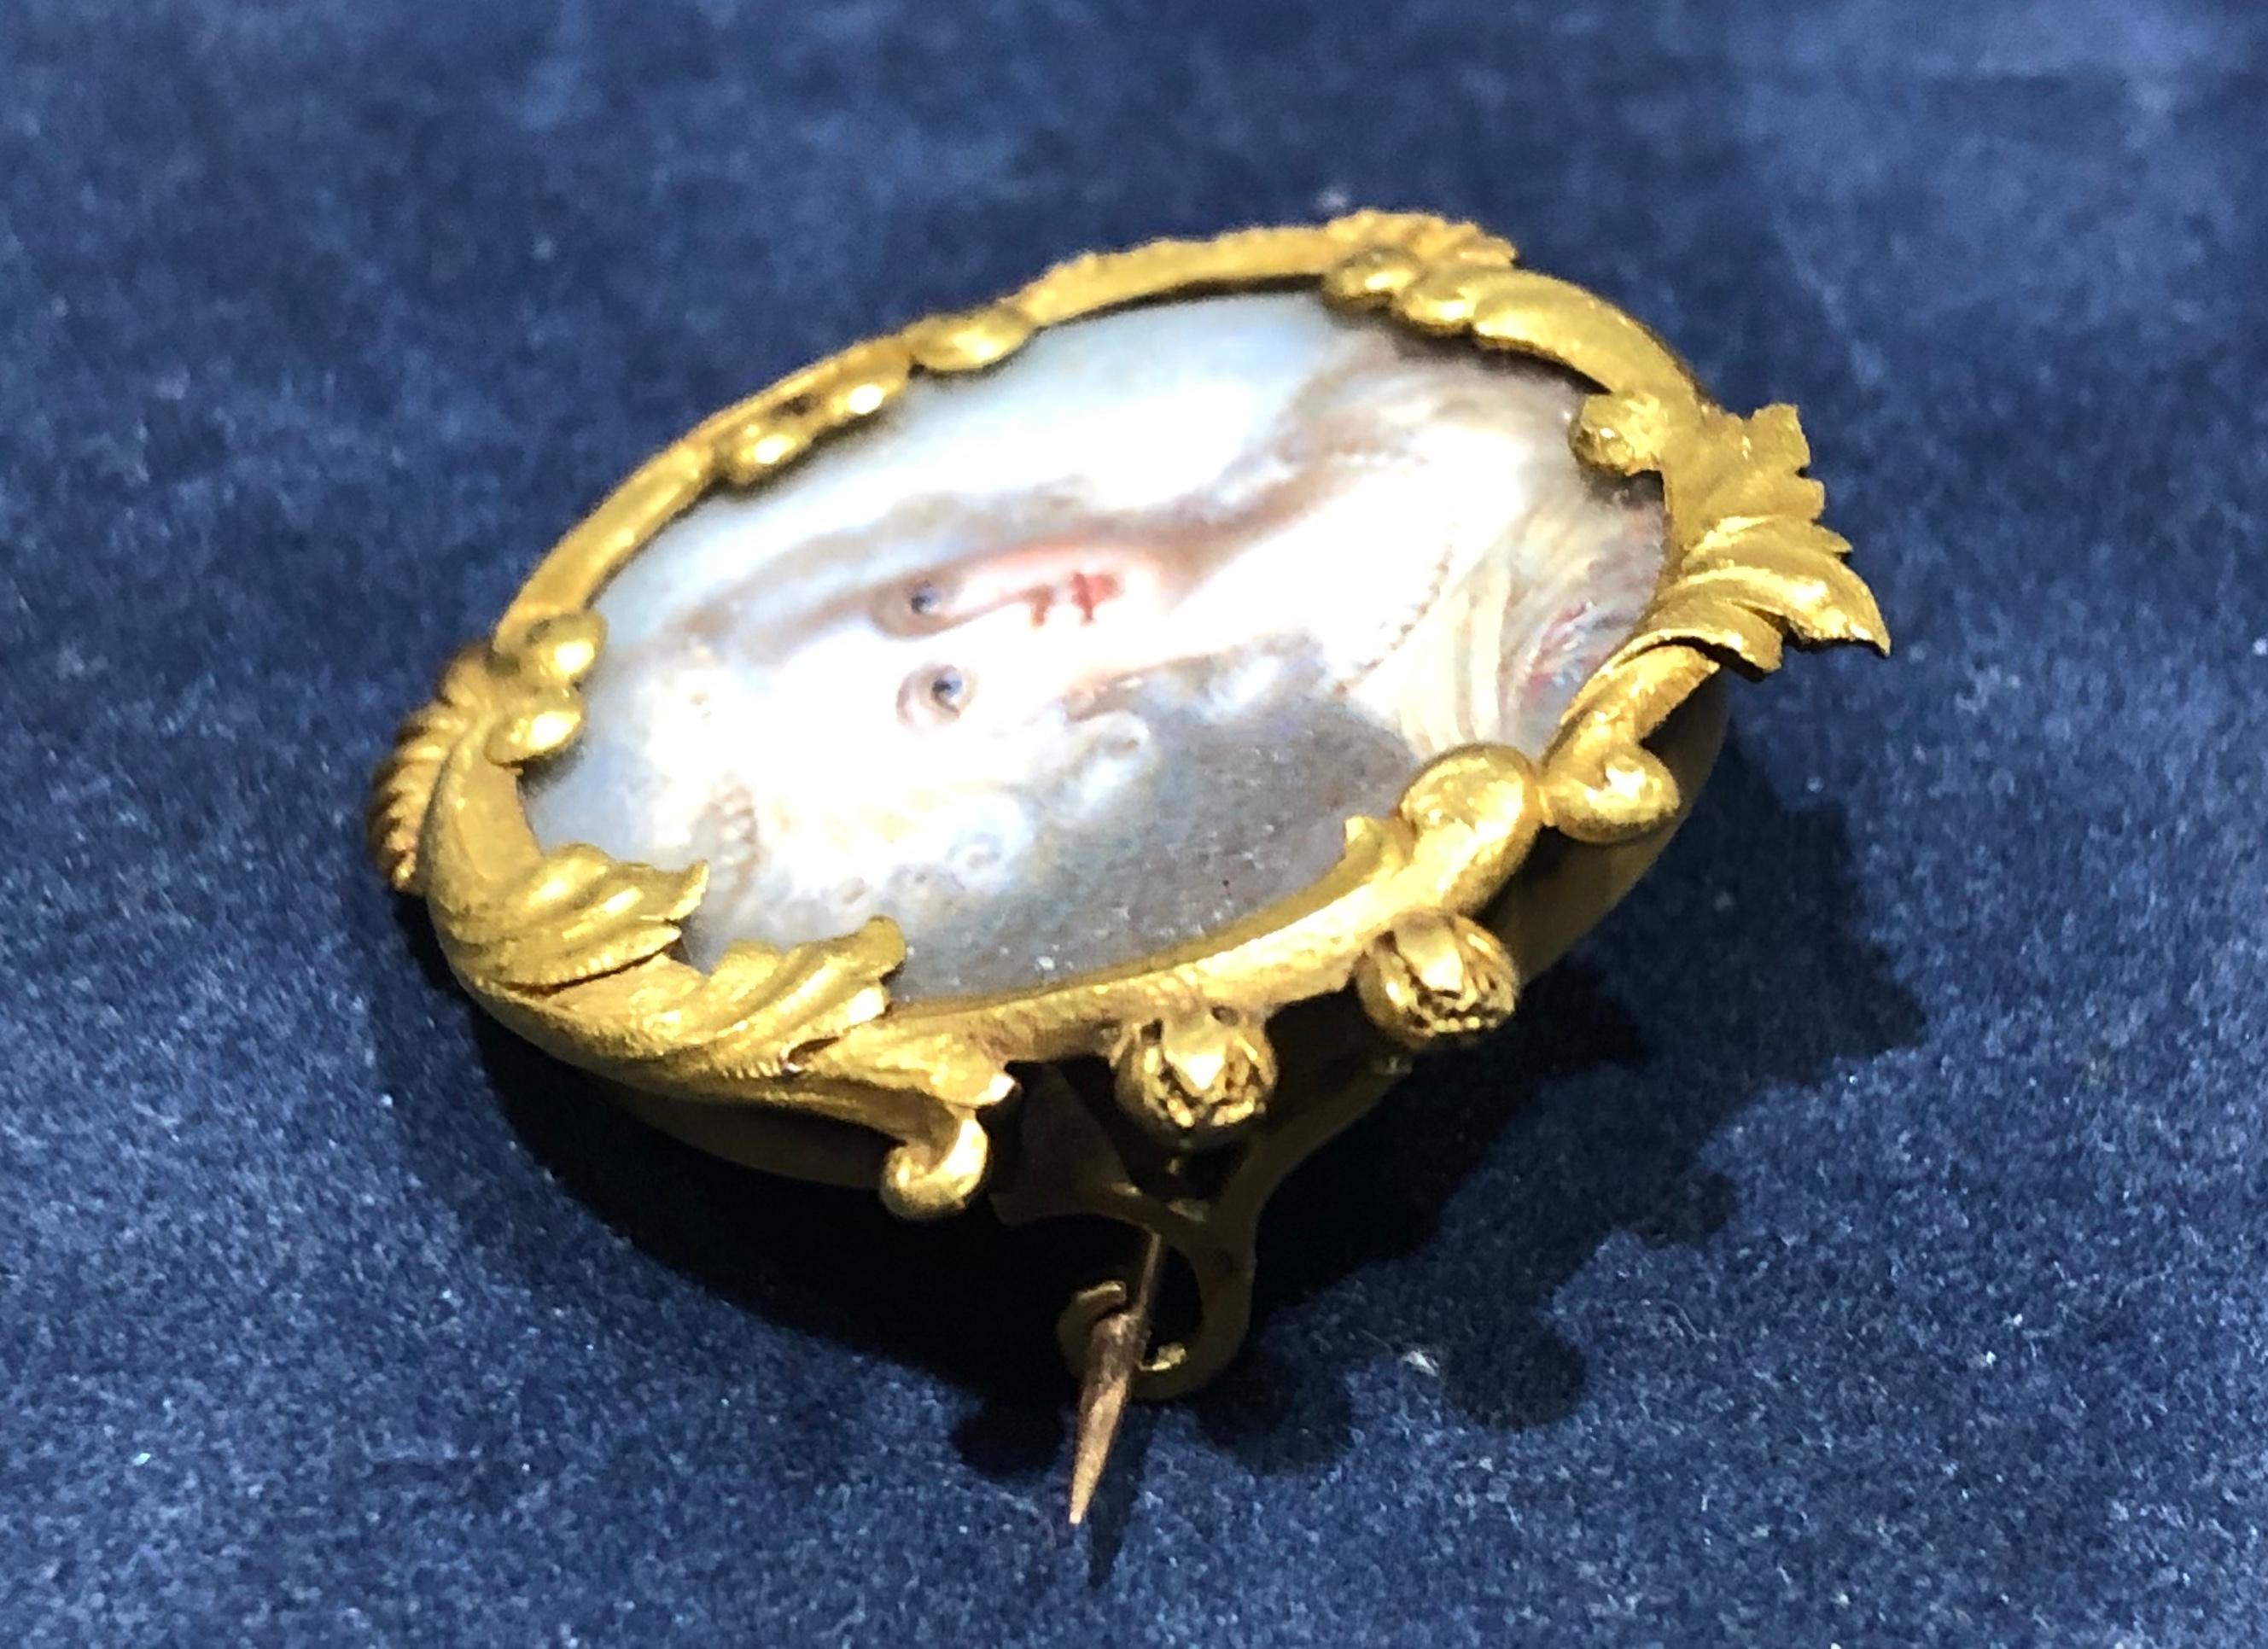 18k Victorian French mother of pearl miniature.  Piece is hallmarked with the eagle shown in the pictures indicating France and purity of 18k.  Measures approximately 1 1/8